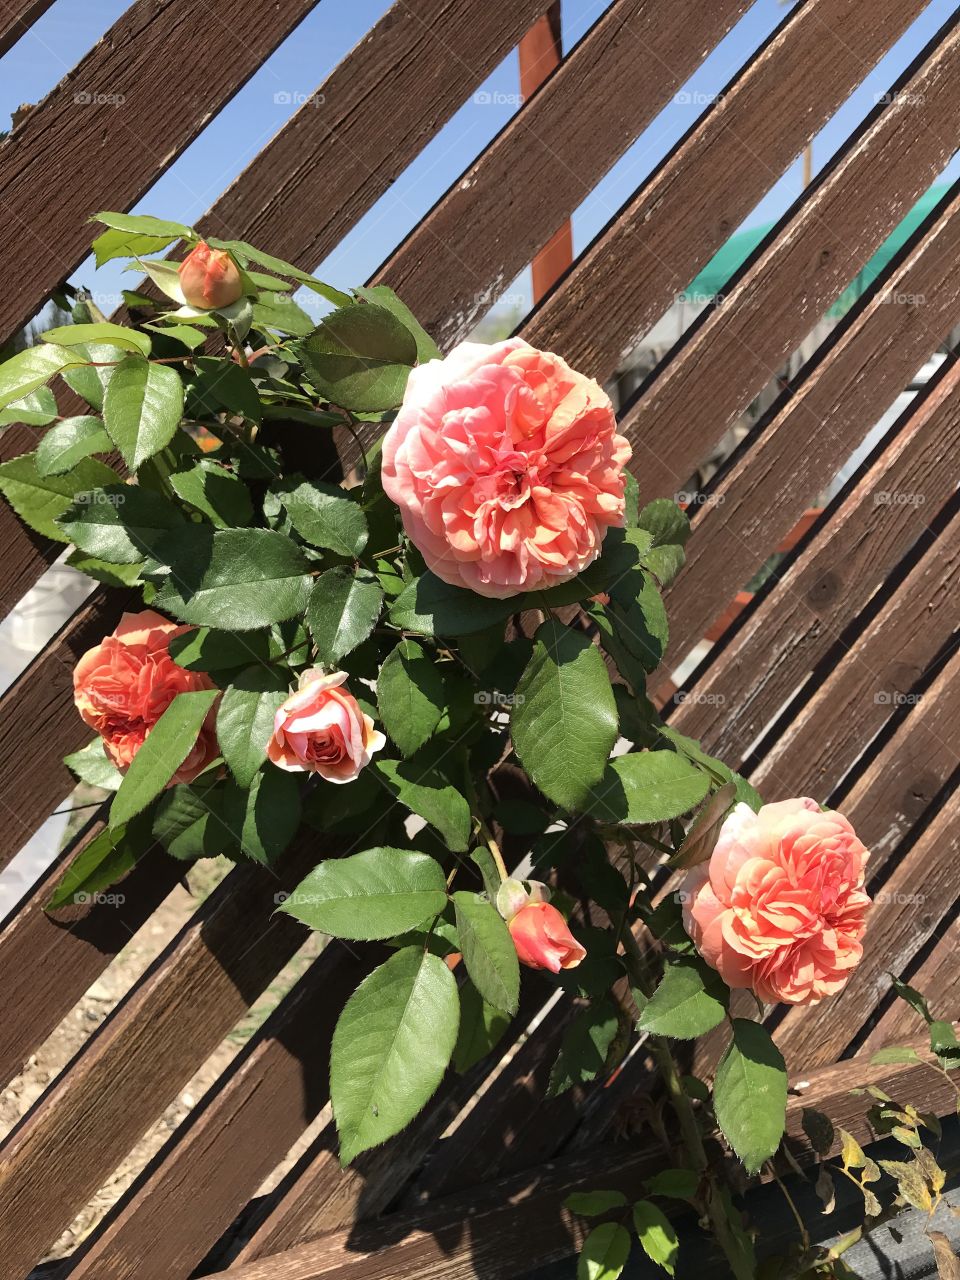 Peach coloured roses against wooden slatted fence